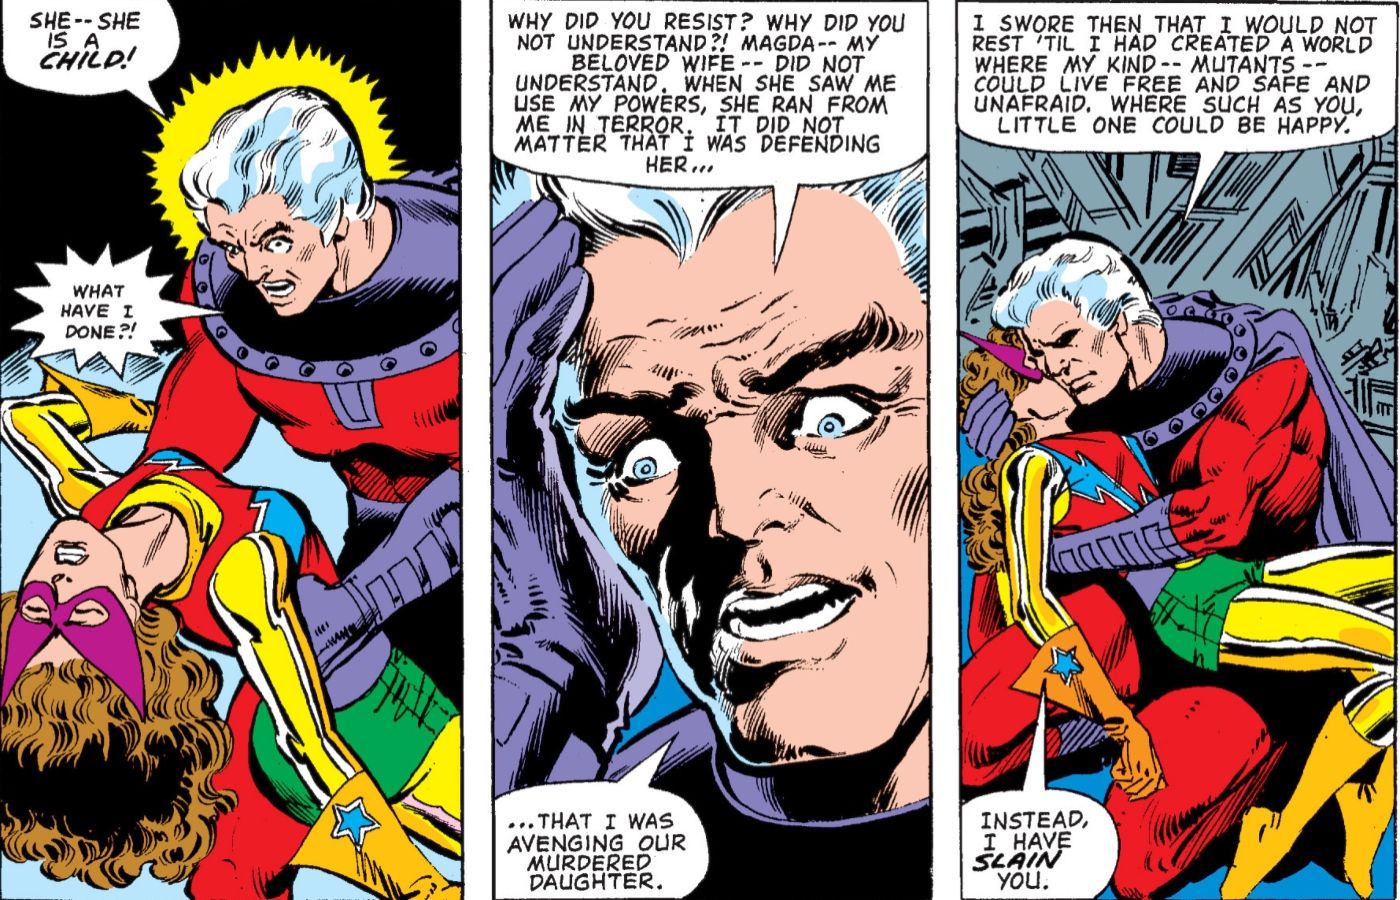 Magneto regrets nearly killing Kate Pryde.